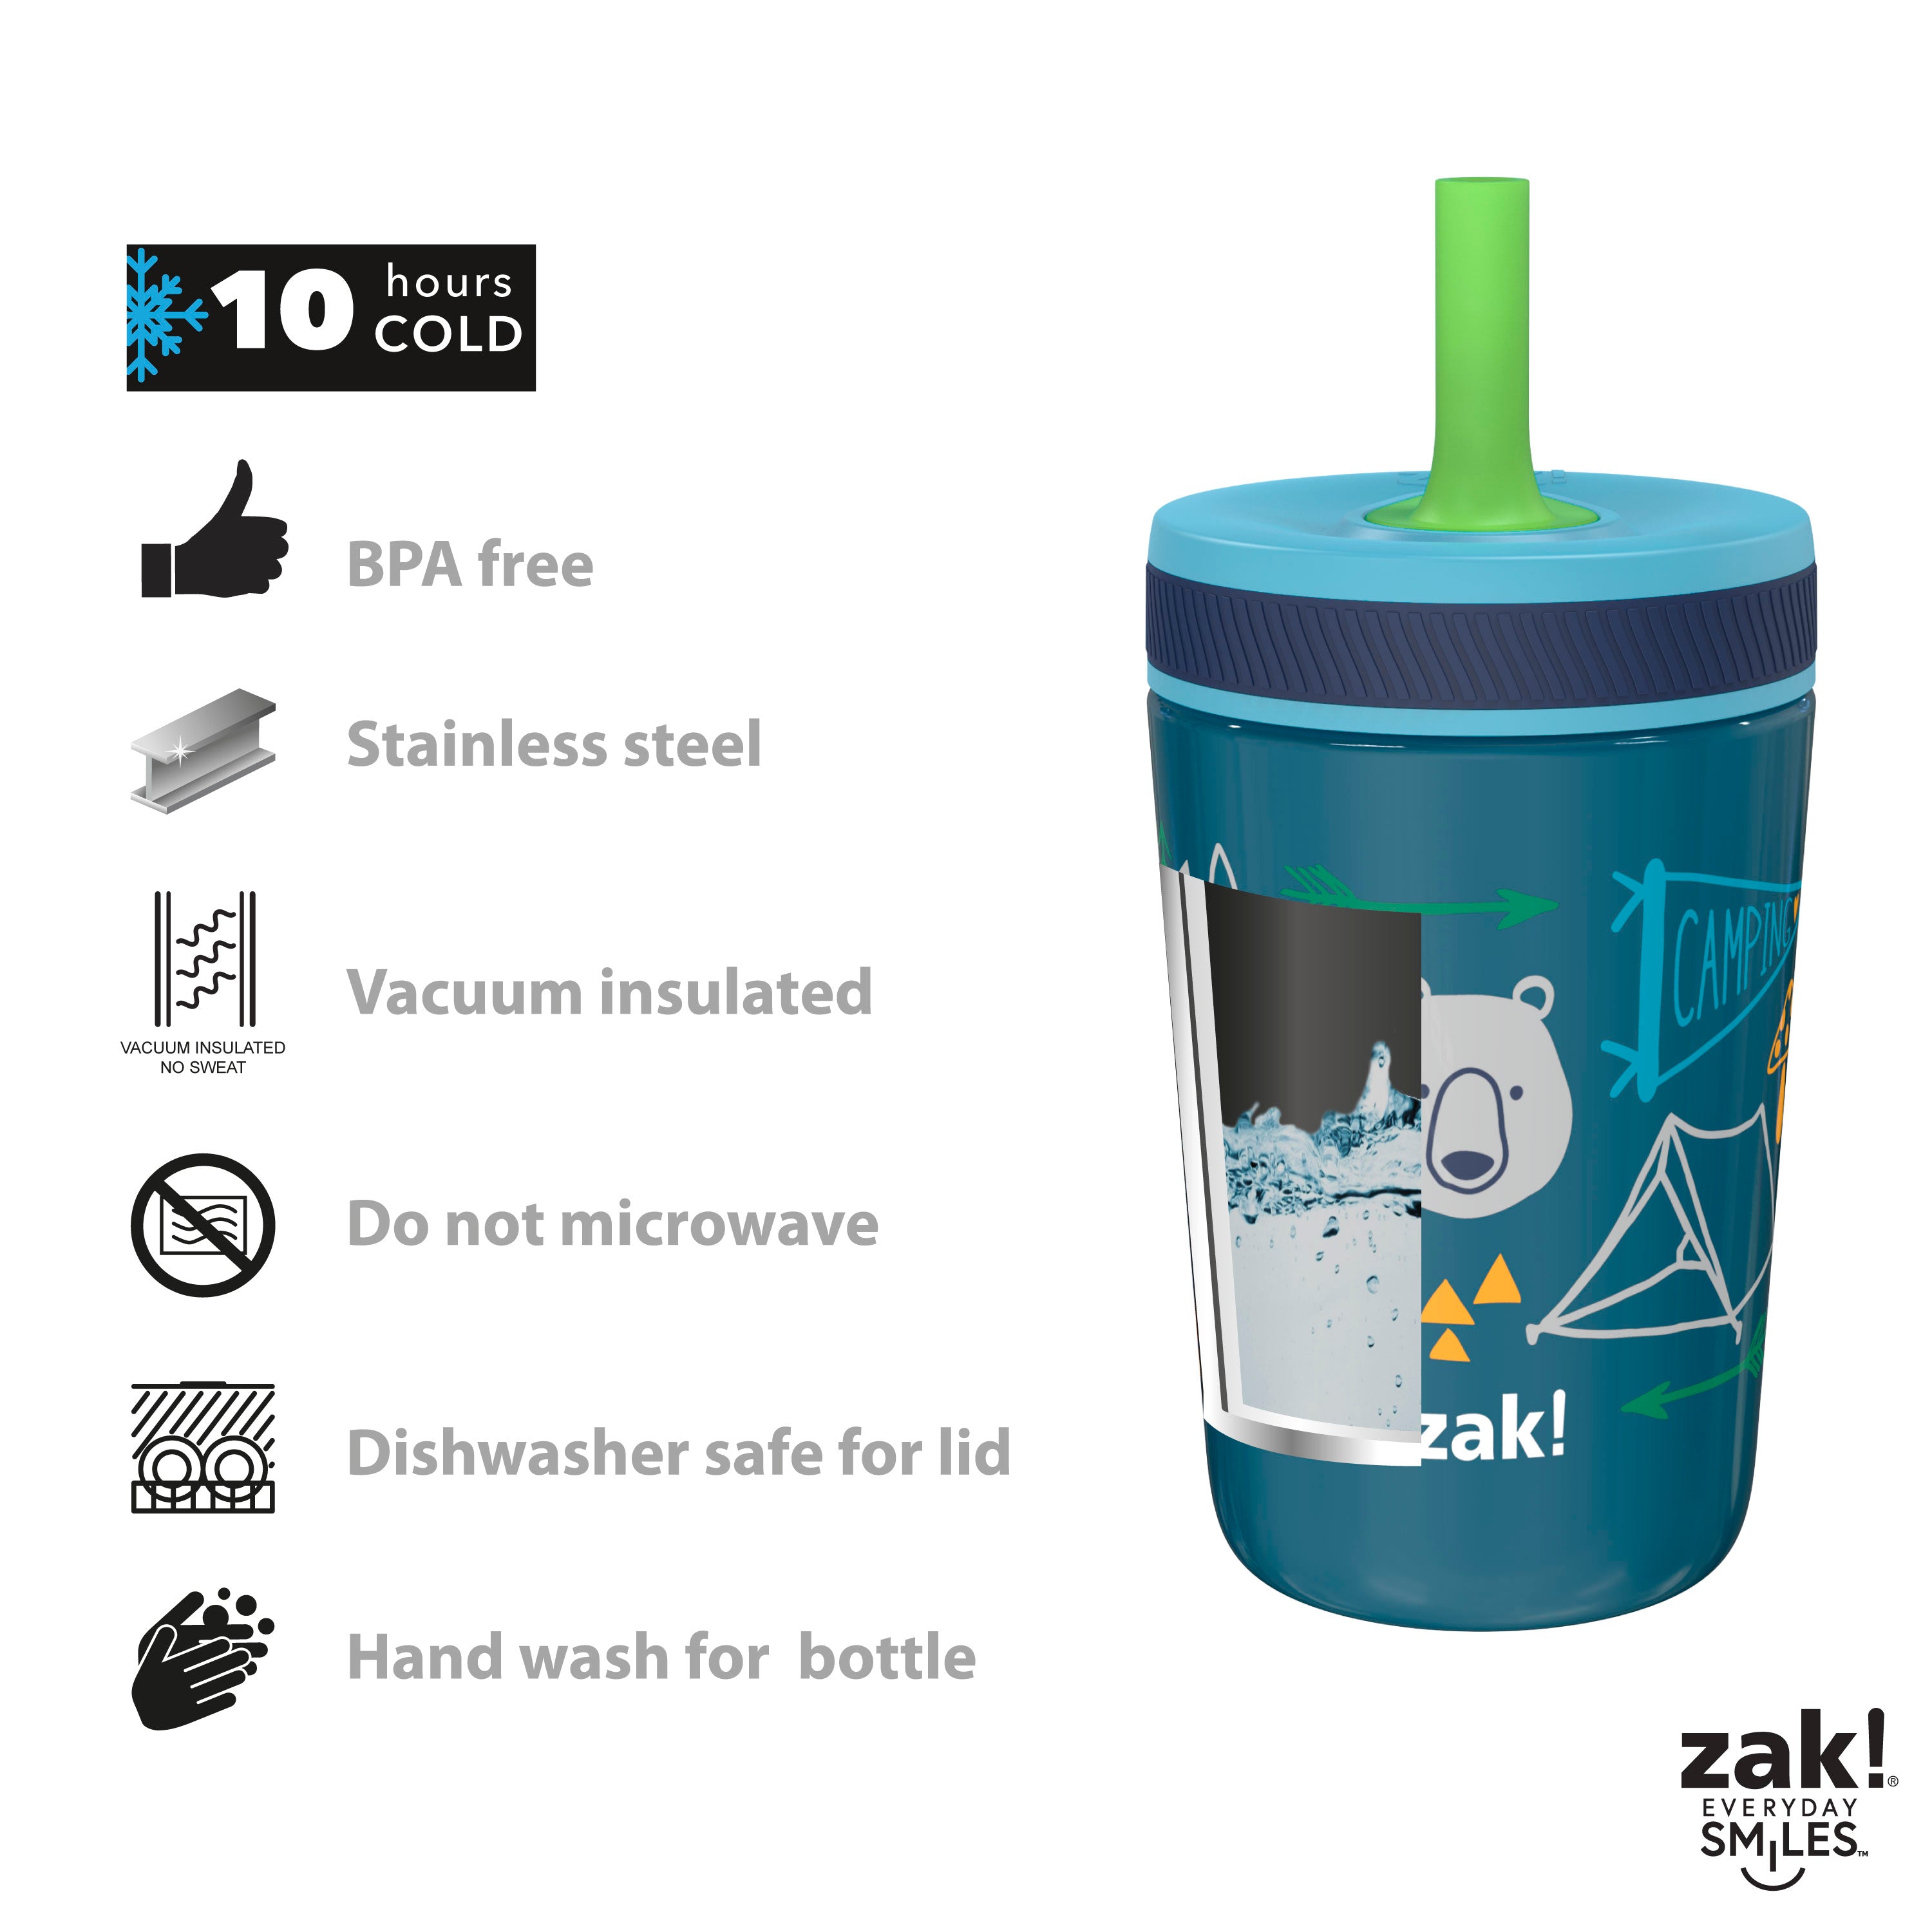 12oz Stainless Steel Shells Double Wall Kelso Tumbler - Zak Designs